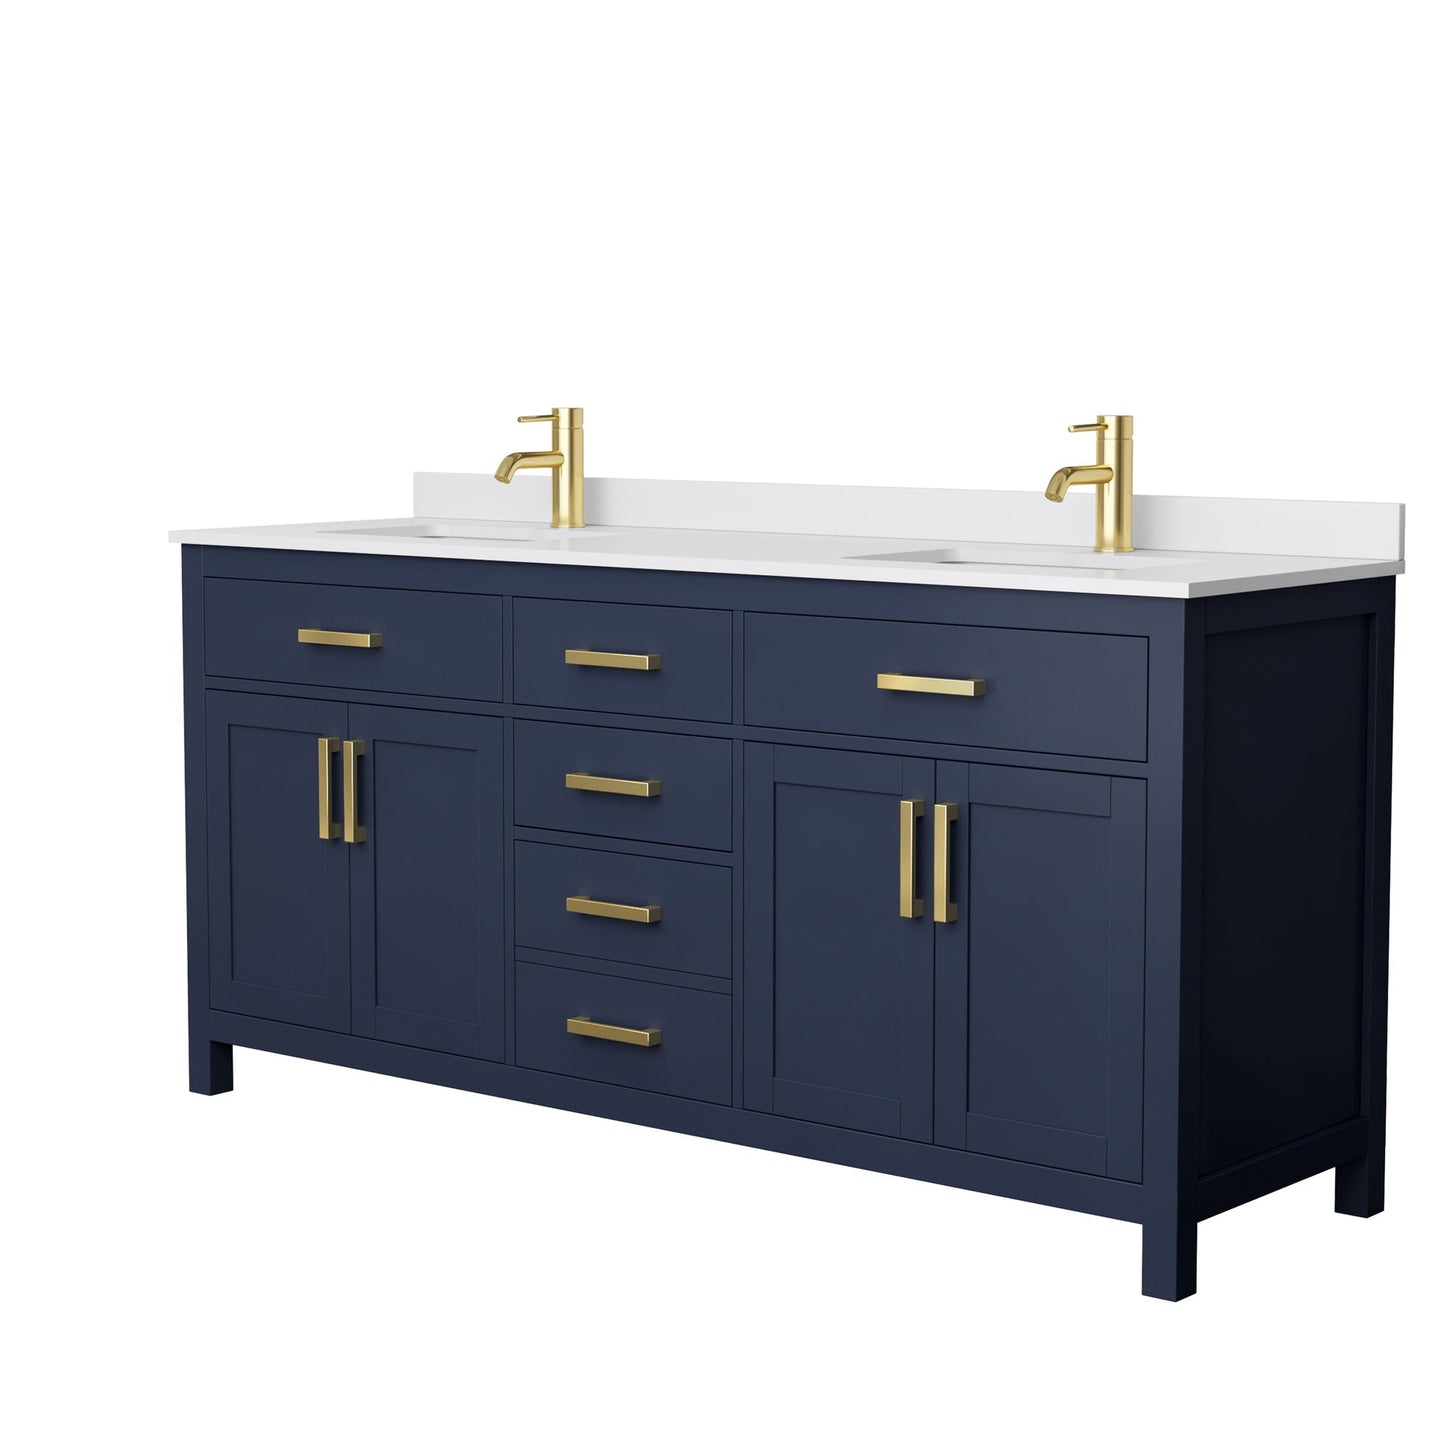 Wyndham Collection Beckett 72" Double Bathroom Dark Blue Vanity With White Cultured Marble Countertop, Undermount Square Sink And Brushed Gold Trim